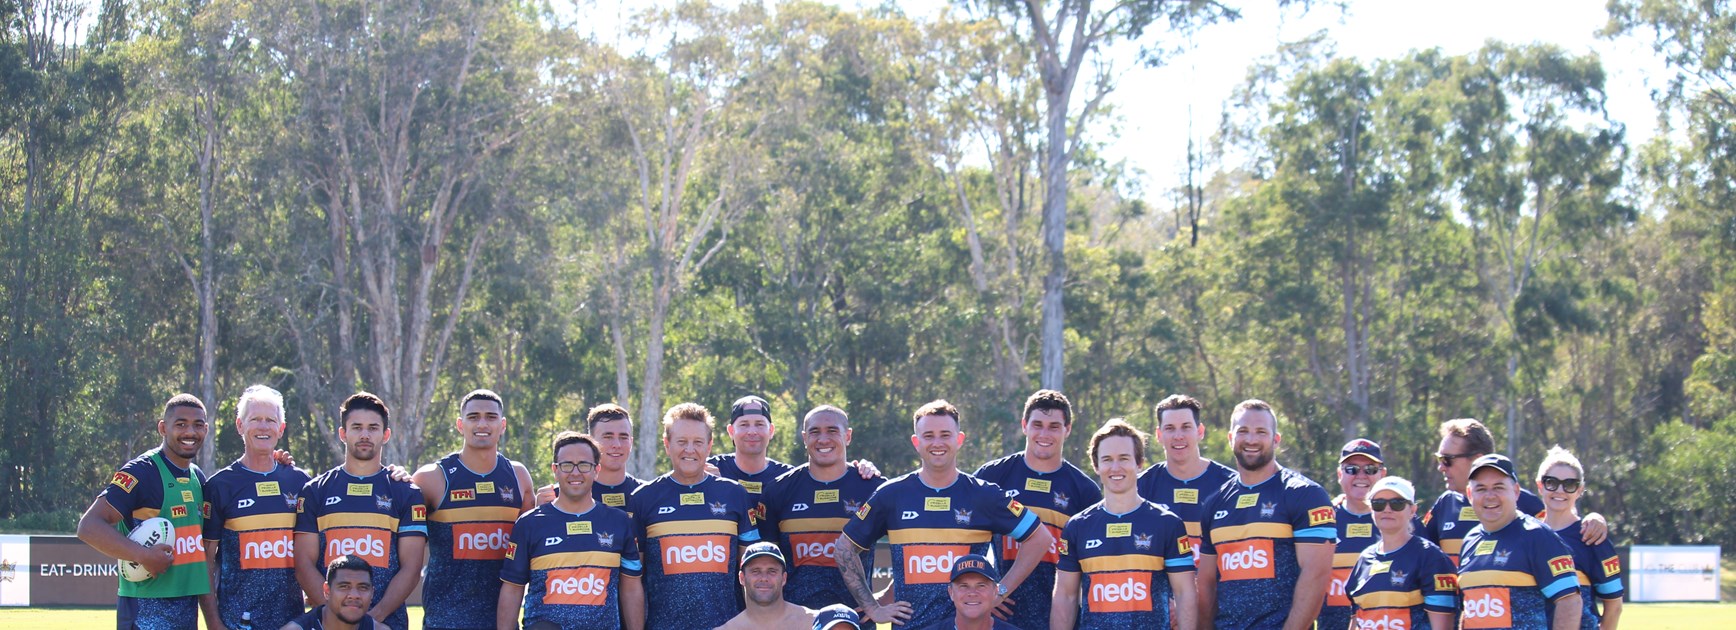 Ray White Team Gets Top Listing At Titans Training